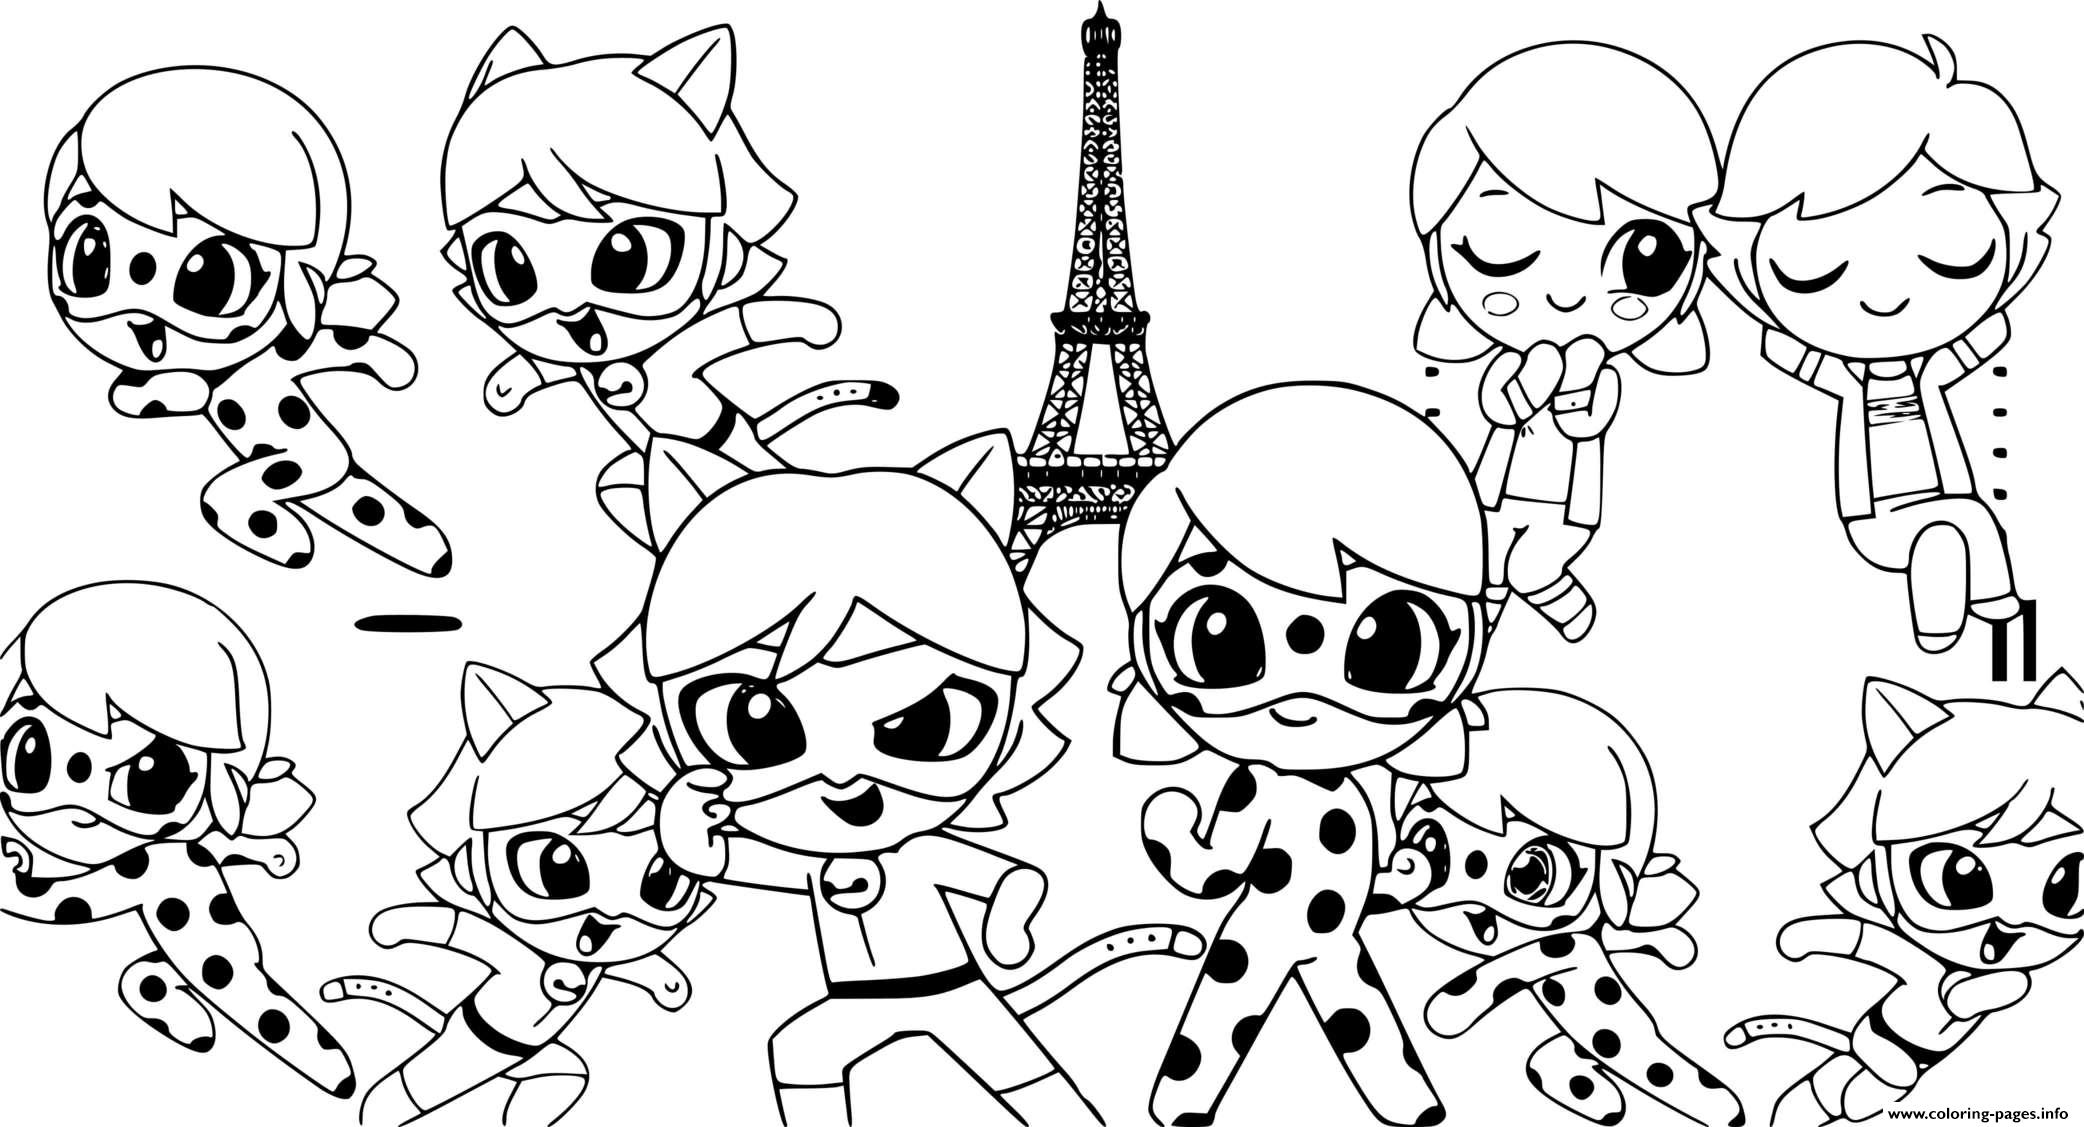 Cute Multimouse Chat Noir Kawaii Coloring Pages Printable